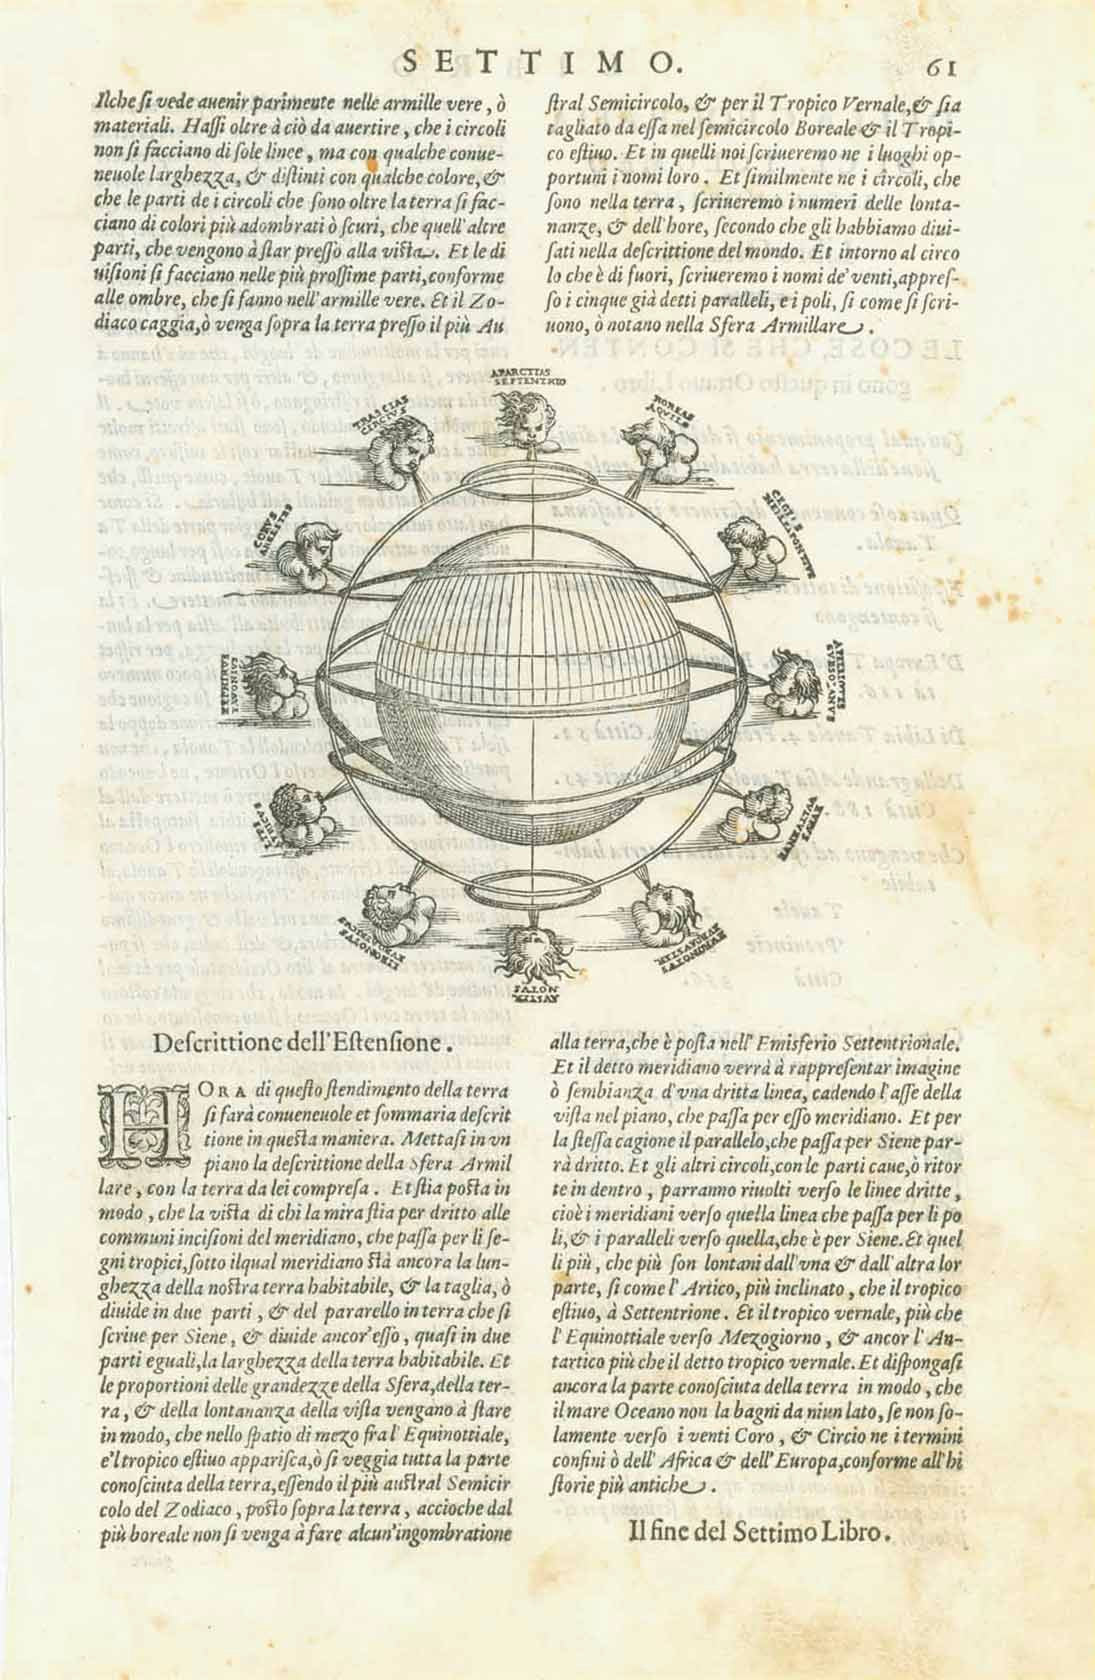 ASTRONOMY - Armillary Sphere by Ptolomy  Article with two copper plates.  The armillary sphere was an ancient (Arabian) construction to show the coordinates of astronomical system. It was used even in "modern" times, until science allowed for more precise measurements.  In Claudio Ptolomy's "Geographica cio e Descrittione universale della Terra" we find this system explained. The here offered articles are from the Italian edition of this fundamental work  The Italian edition was edited and published by Giov